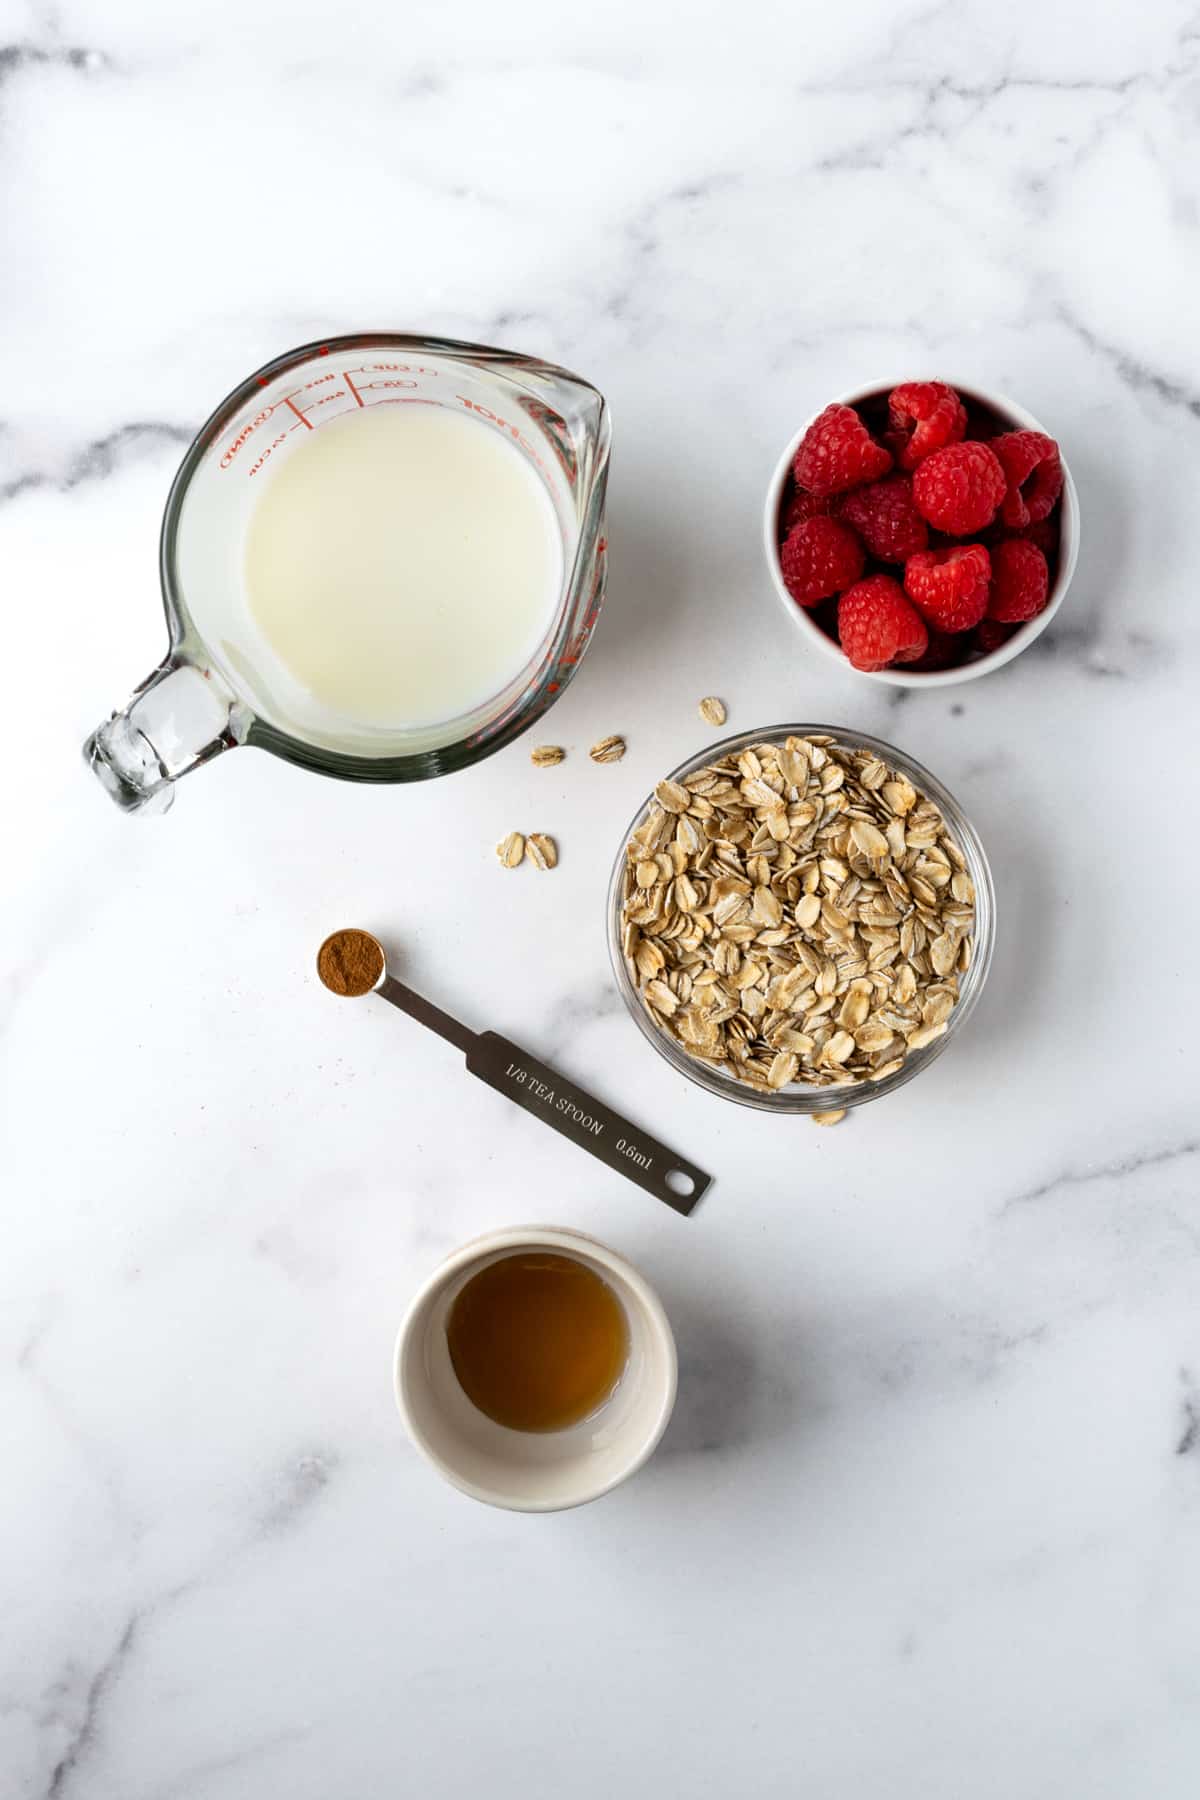 Milk, Oats, Raspberries, Cinnamon, and Maple Syrup in prep bowls on a marble countertop for overnight oats.